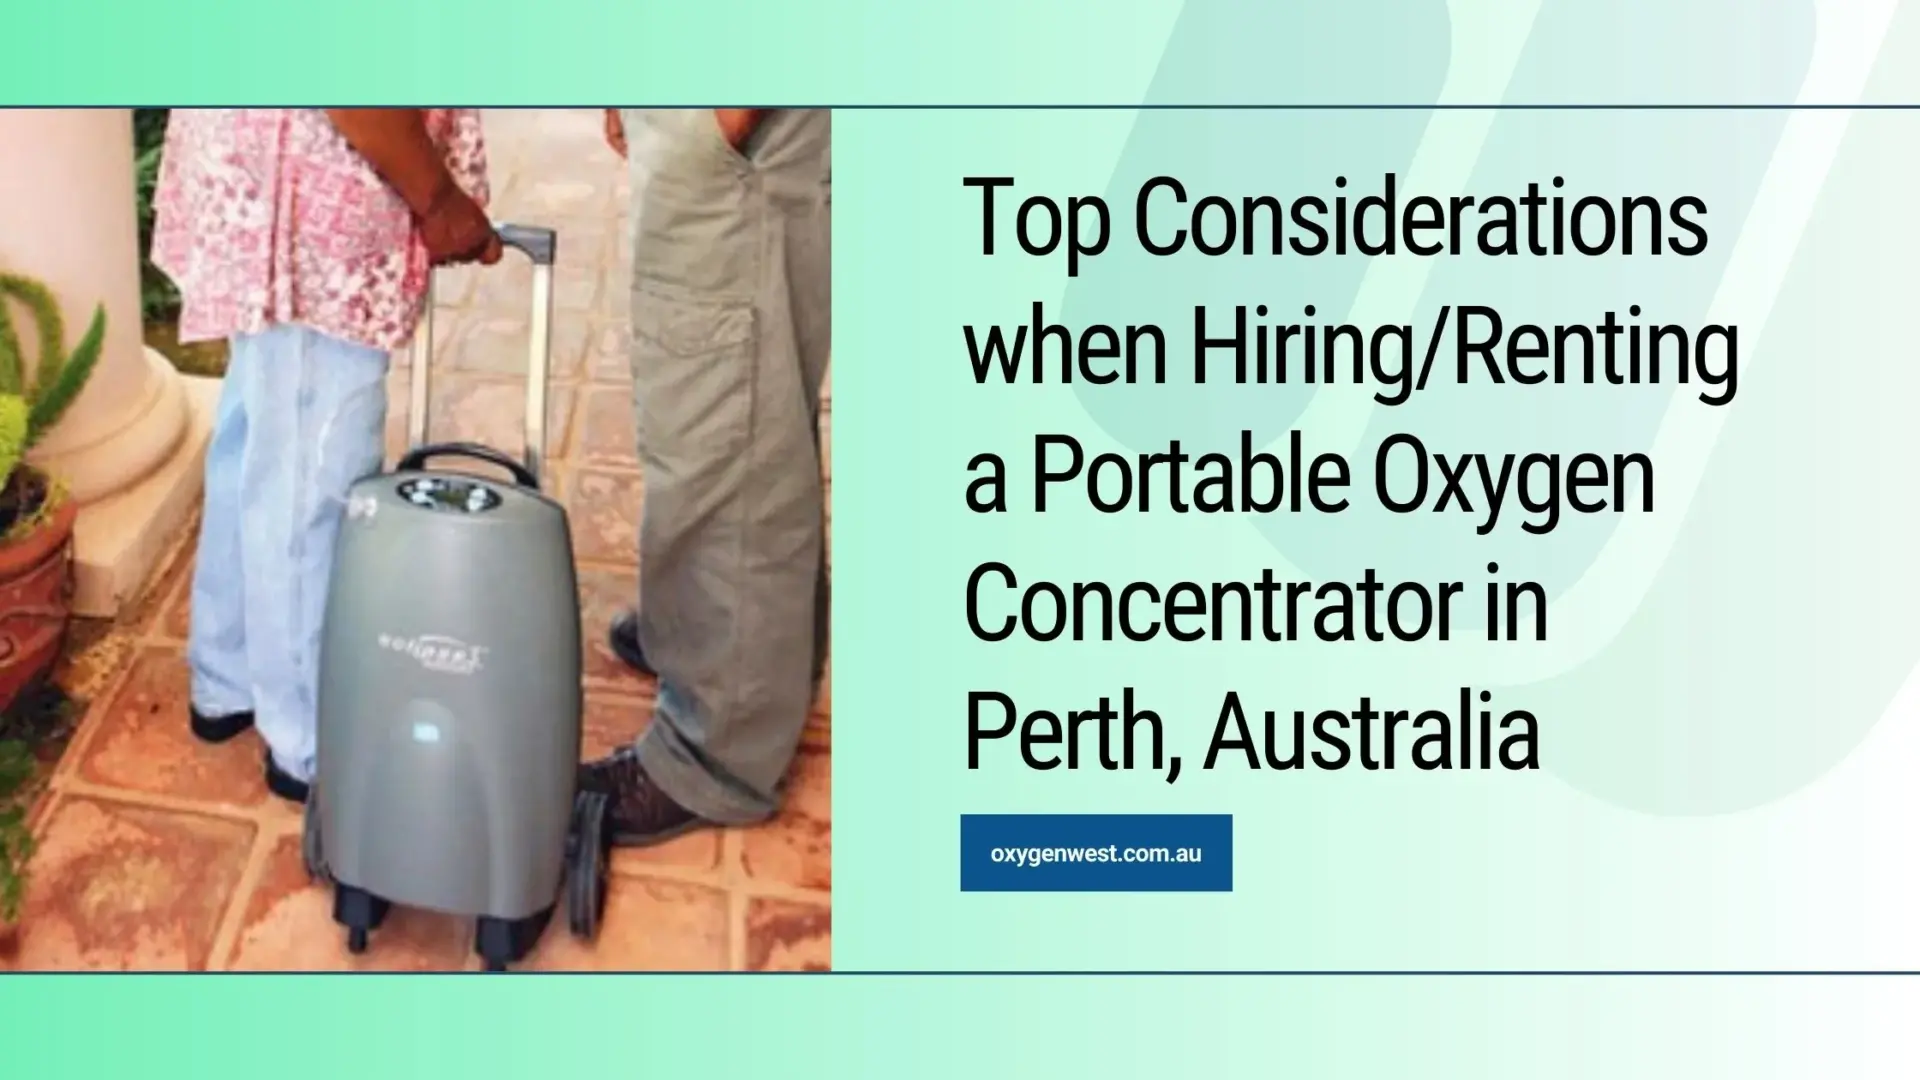 Top Considerations when Hiring/Renting a Portable Oxygen Concentrator in Perth, Australia